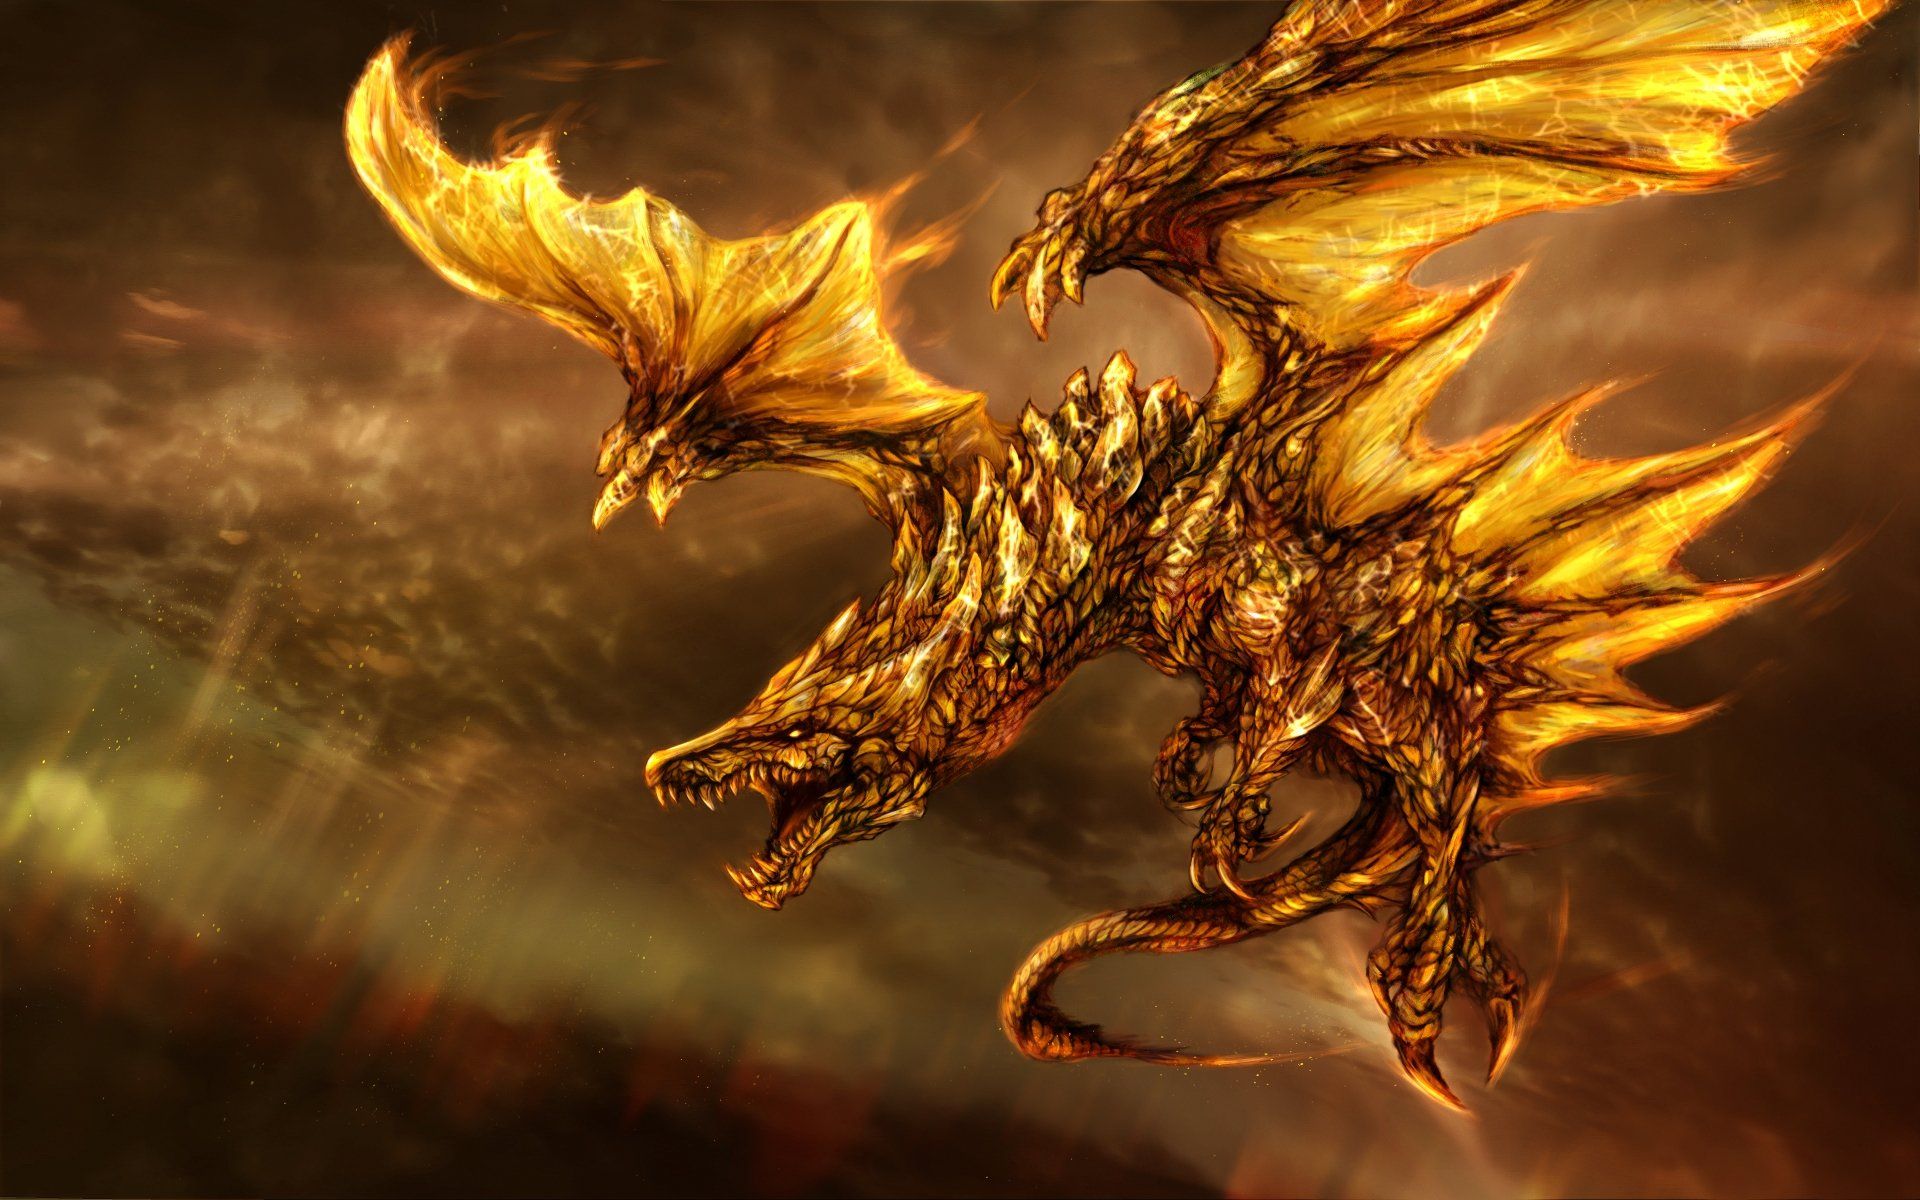 Fire Dragon Live Wallpaper:Amazon.com:Appstore for Android